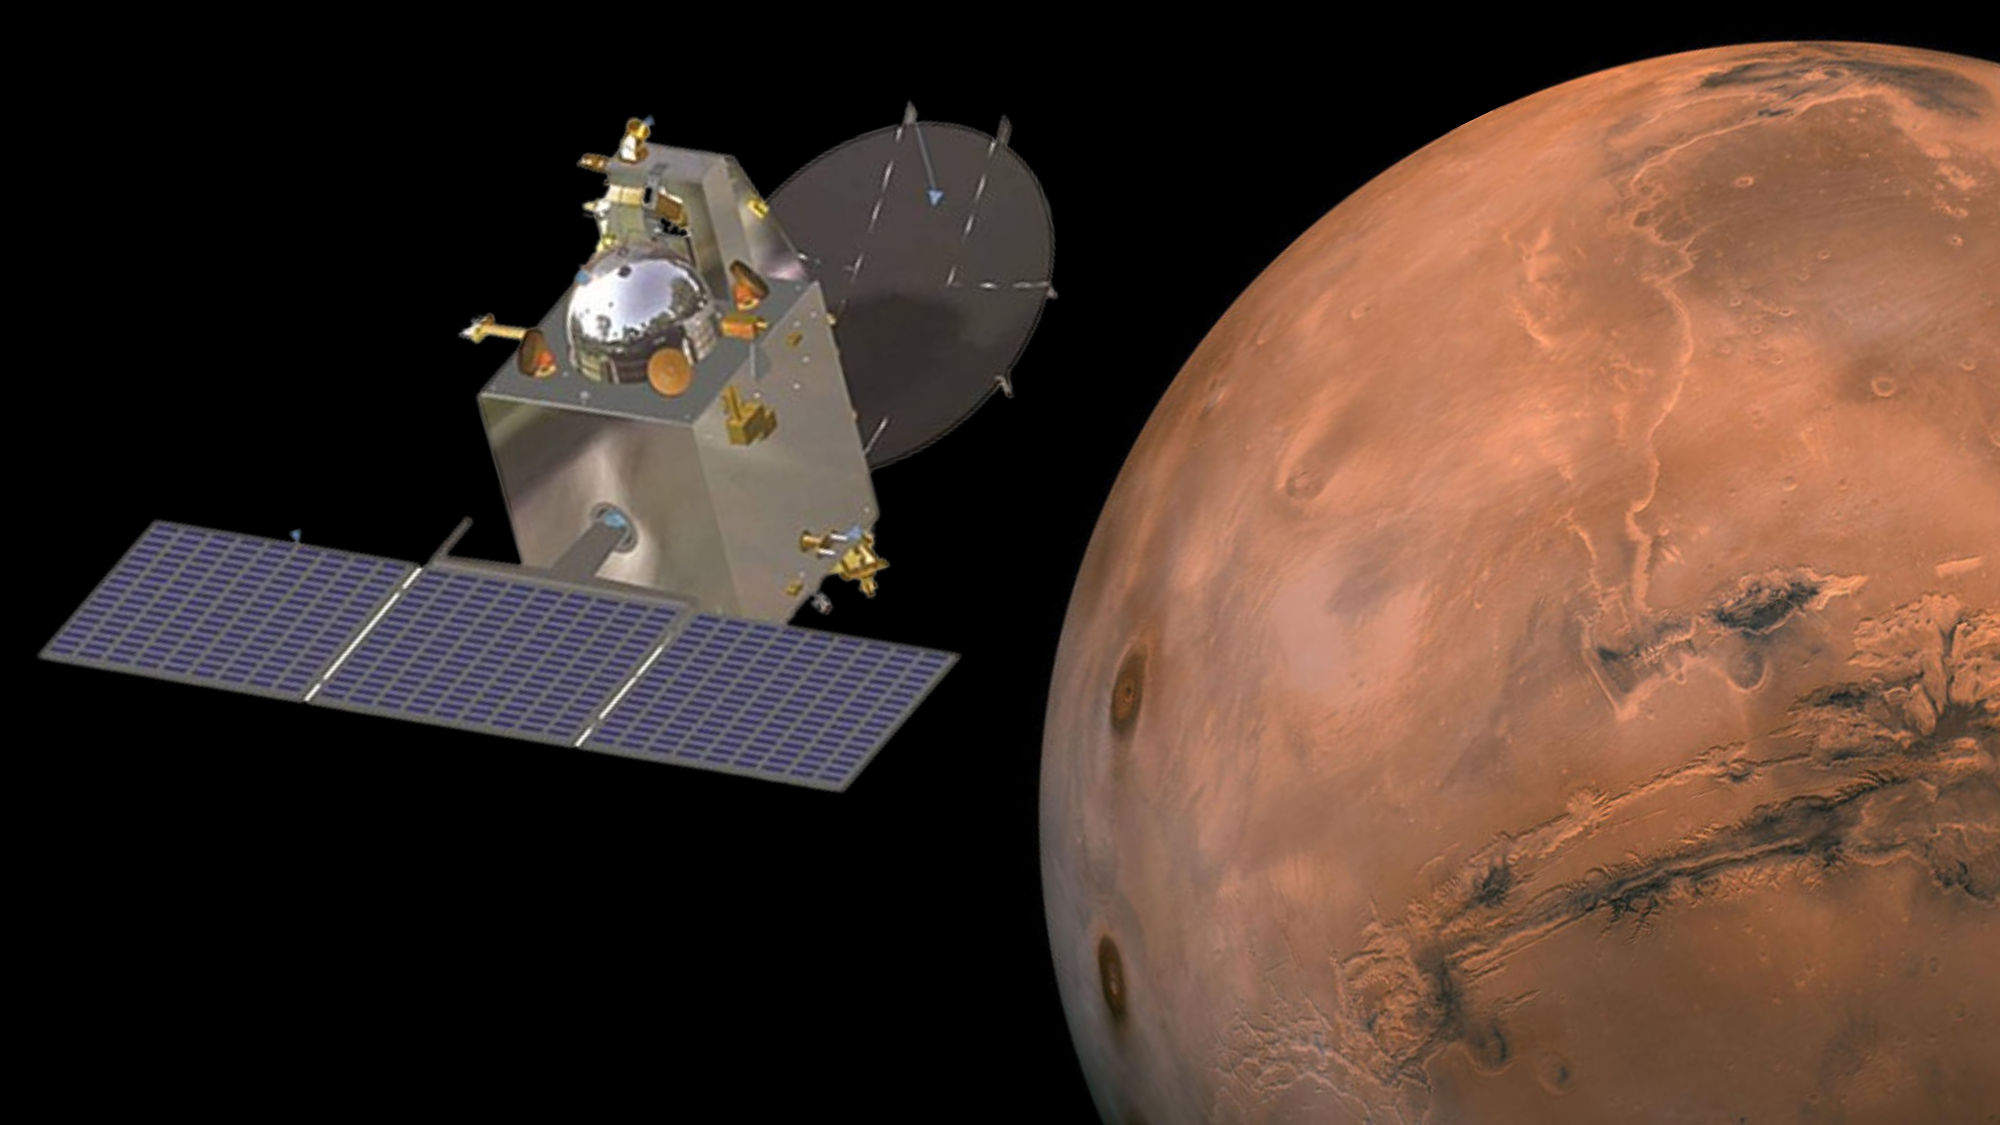 India loses contact with Mars orbiter: reports